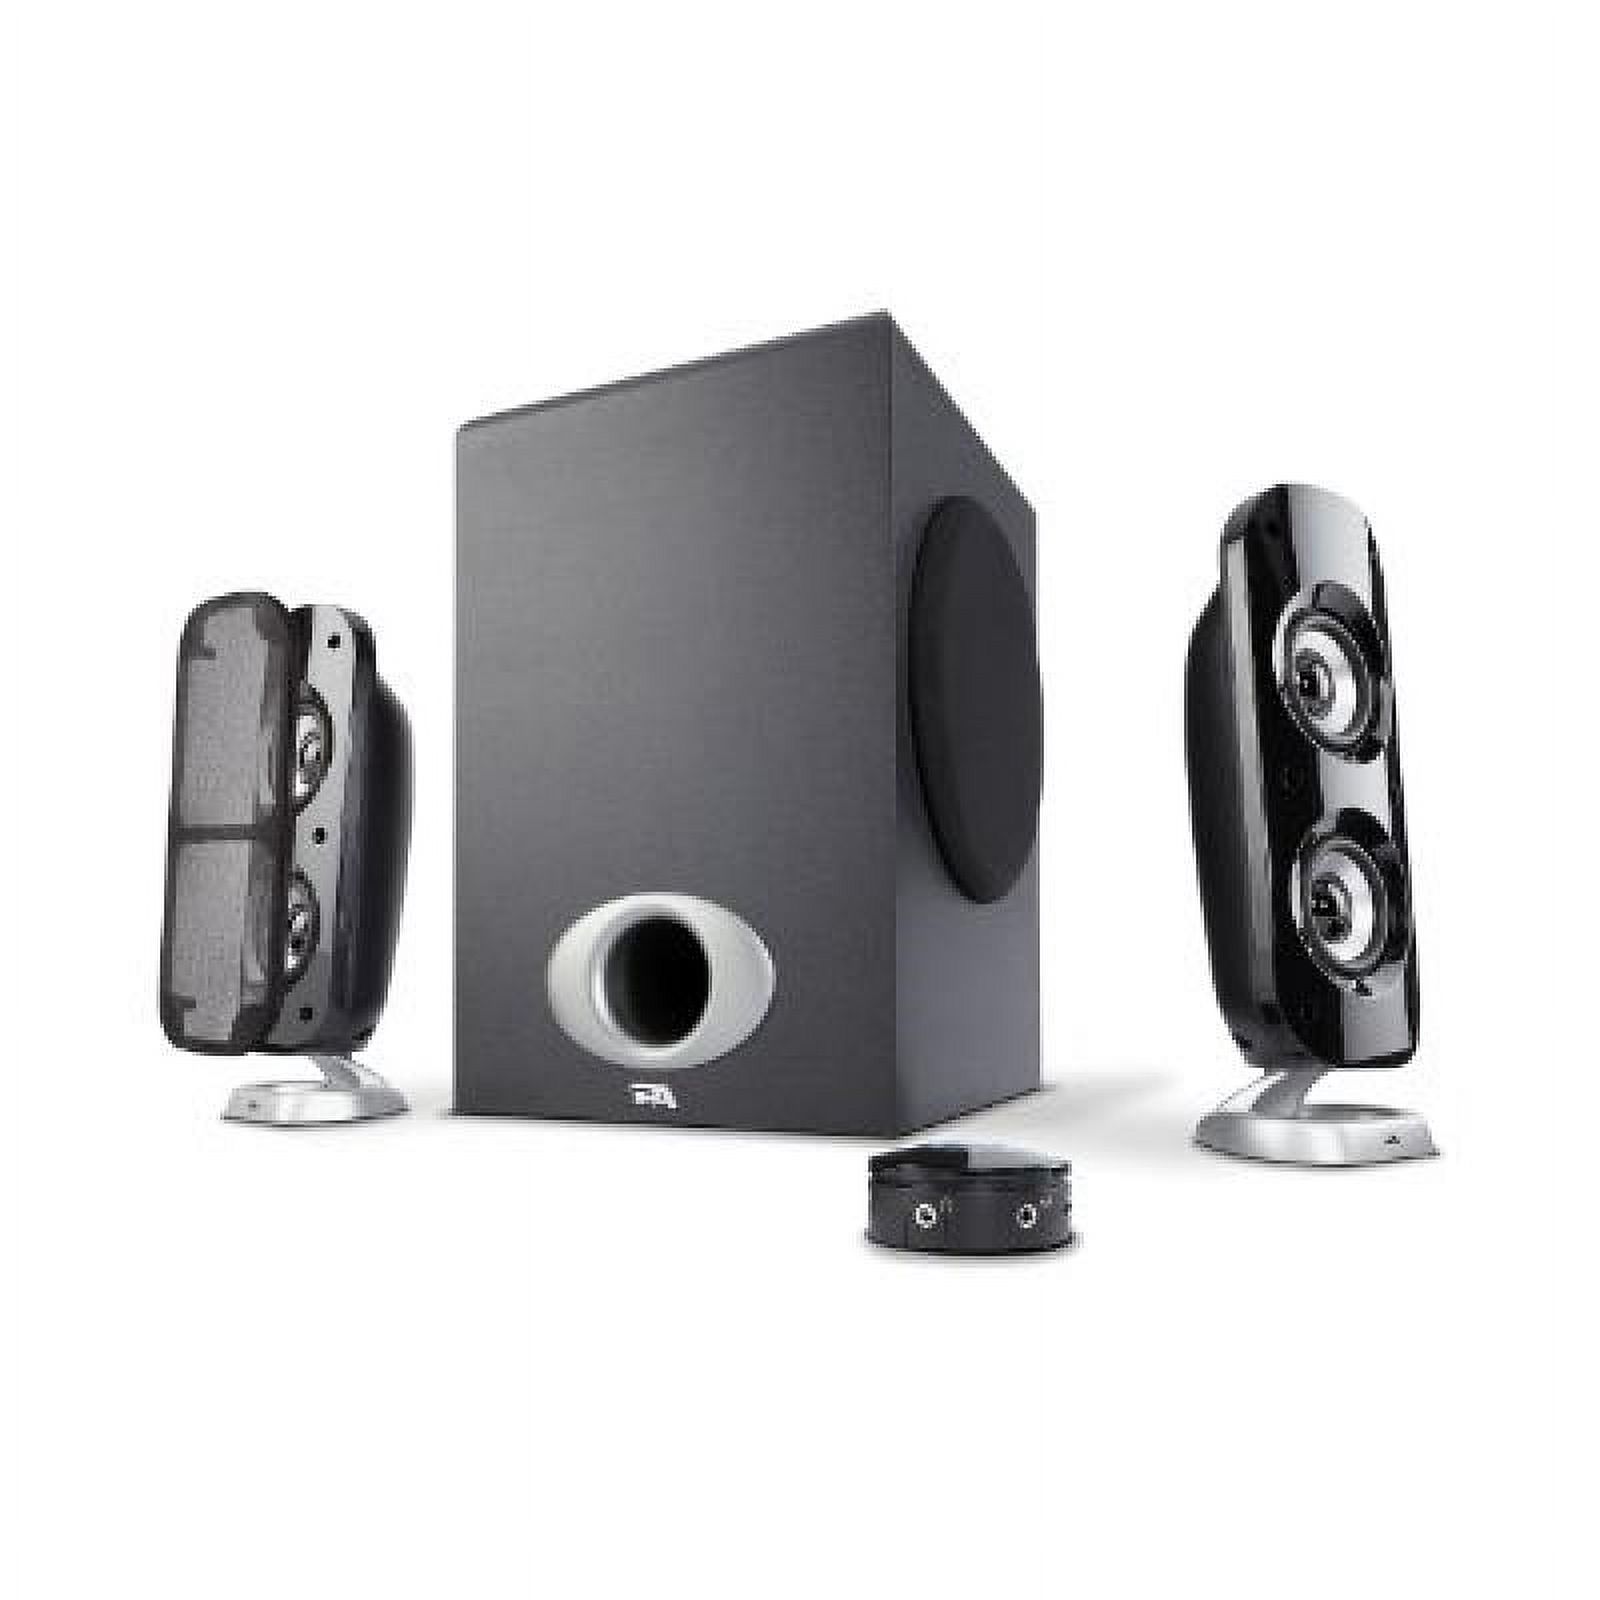 Cyber Acoustics CA- Multimedia Speaker System with Subwoofer, 80 Watts Peak Power, Strong Bass, Perfect for Music, Movies, and Games - image 1 of 3